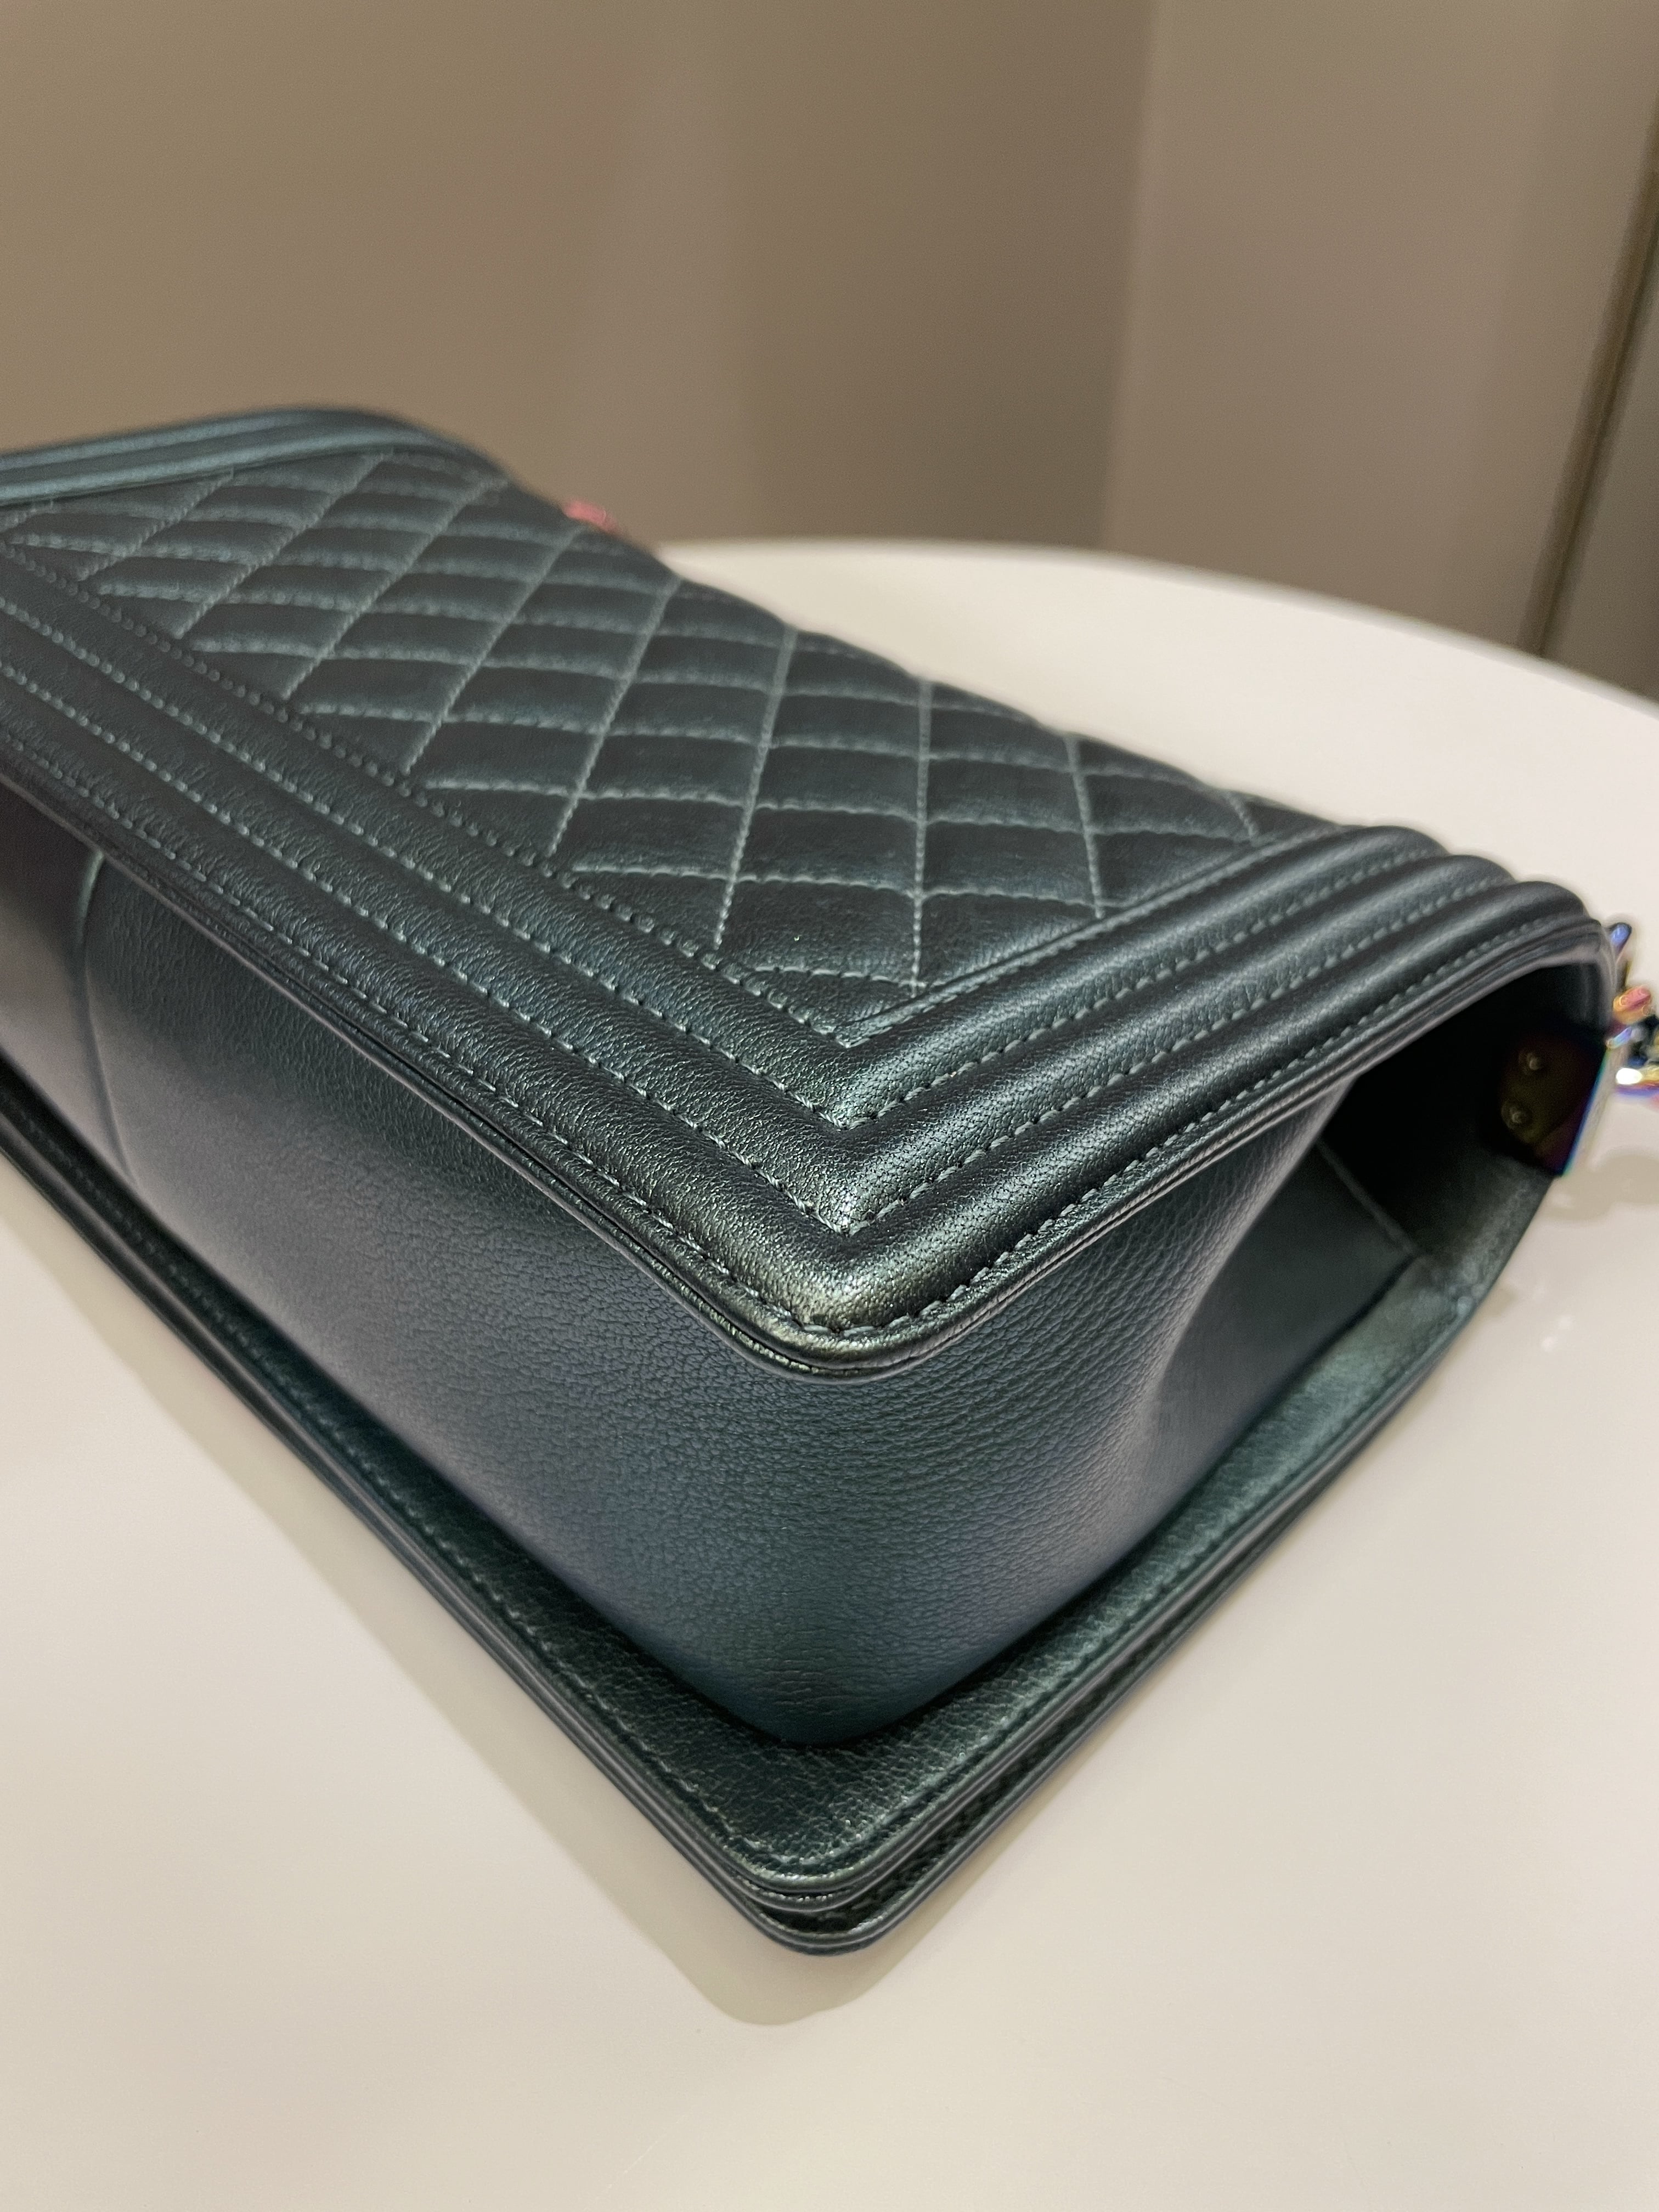 Chanel Quilted Mermaid Boy Old Medium Green Iridescent Goat Skin